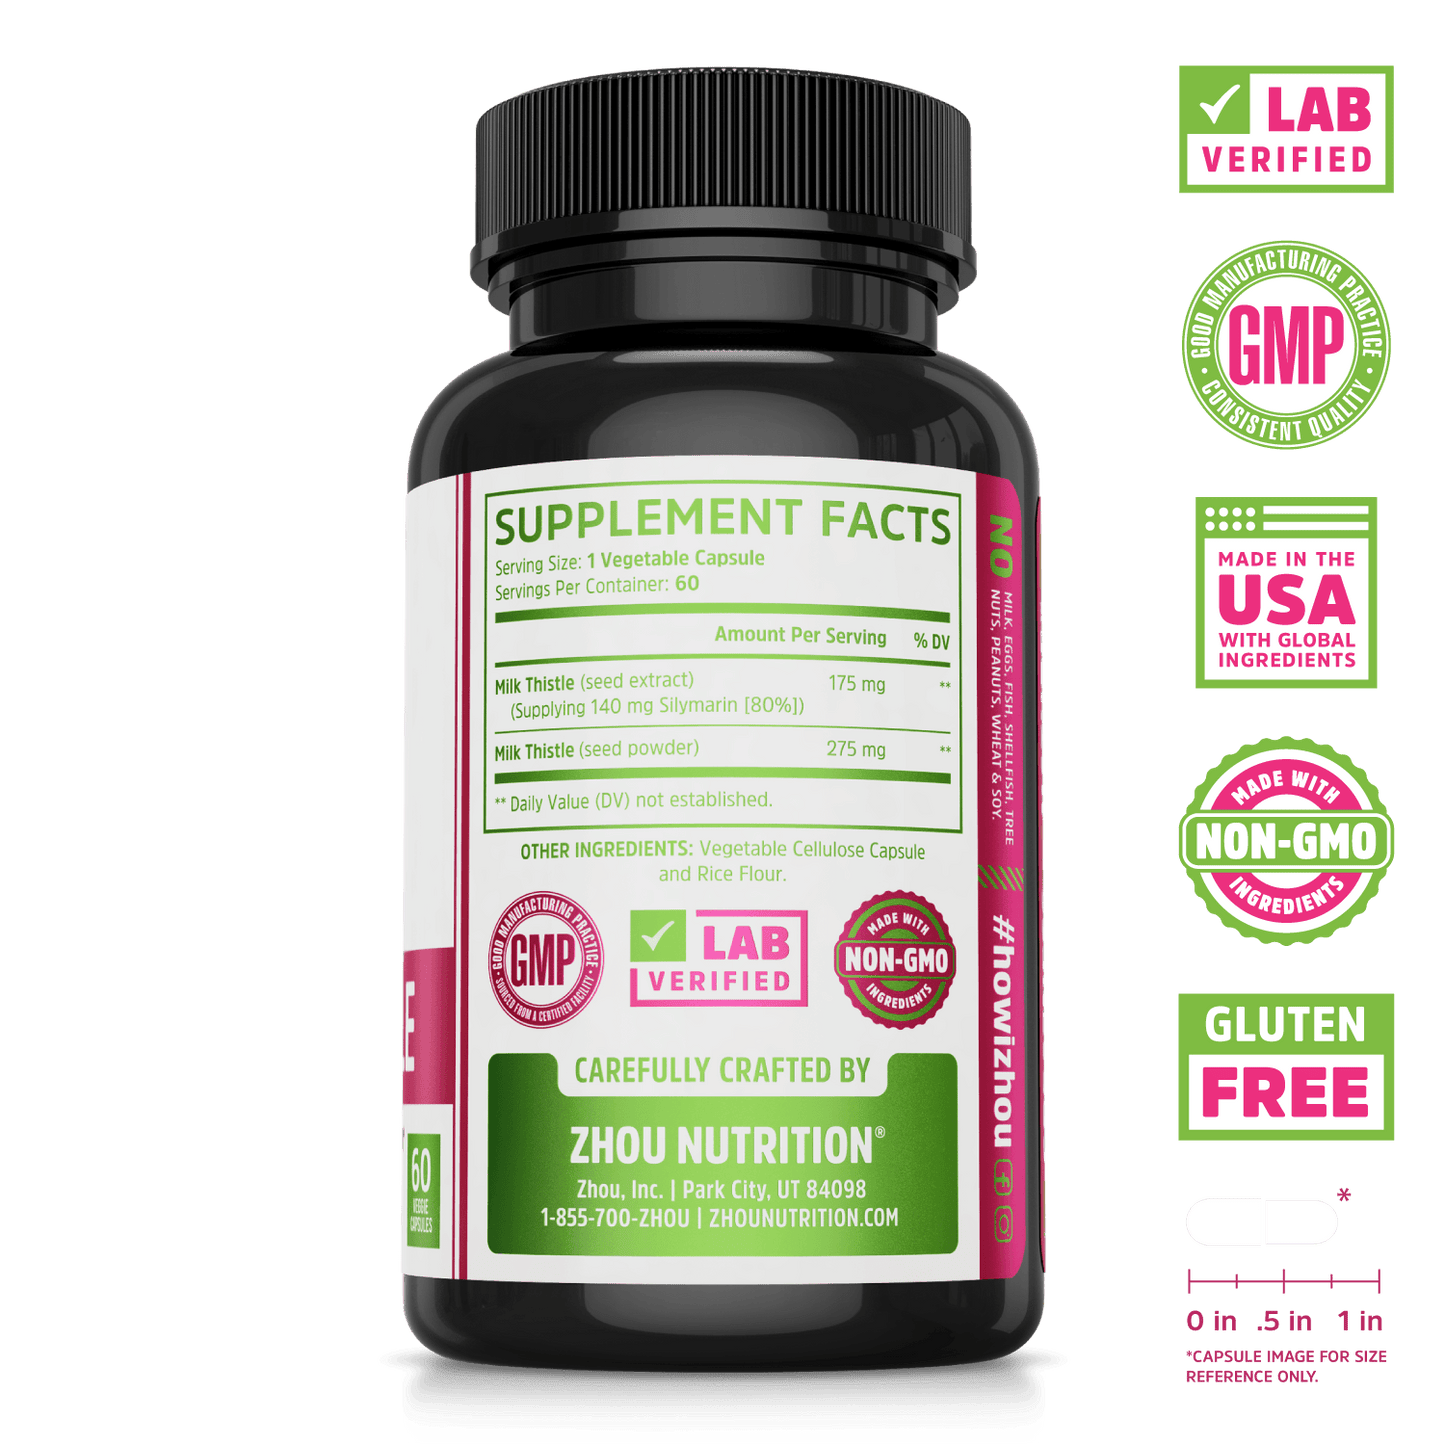 Zhou Nutrition Milk Thistle supplement for liver health. Lab verified, good manufacturing practices, made in the USA with global ingredients, made with non-GMO ingredients, gluten free